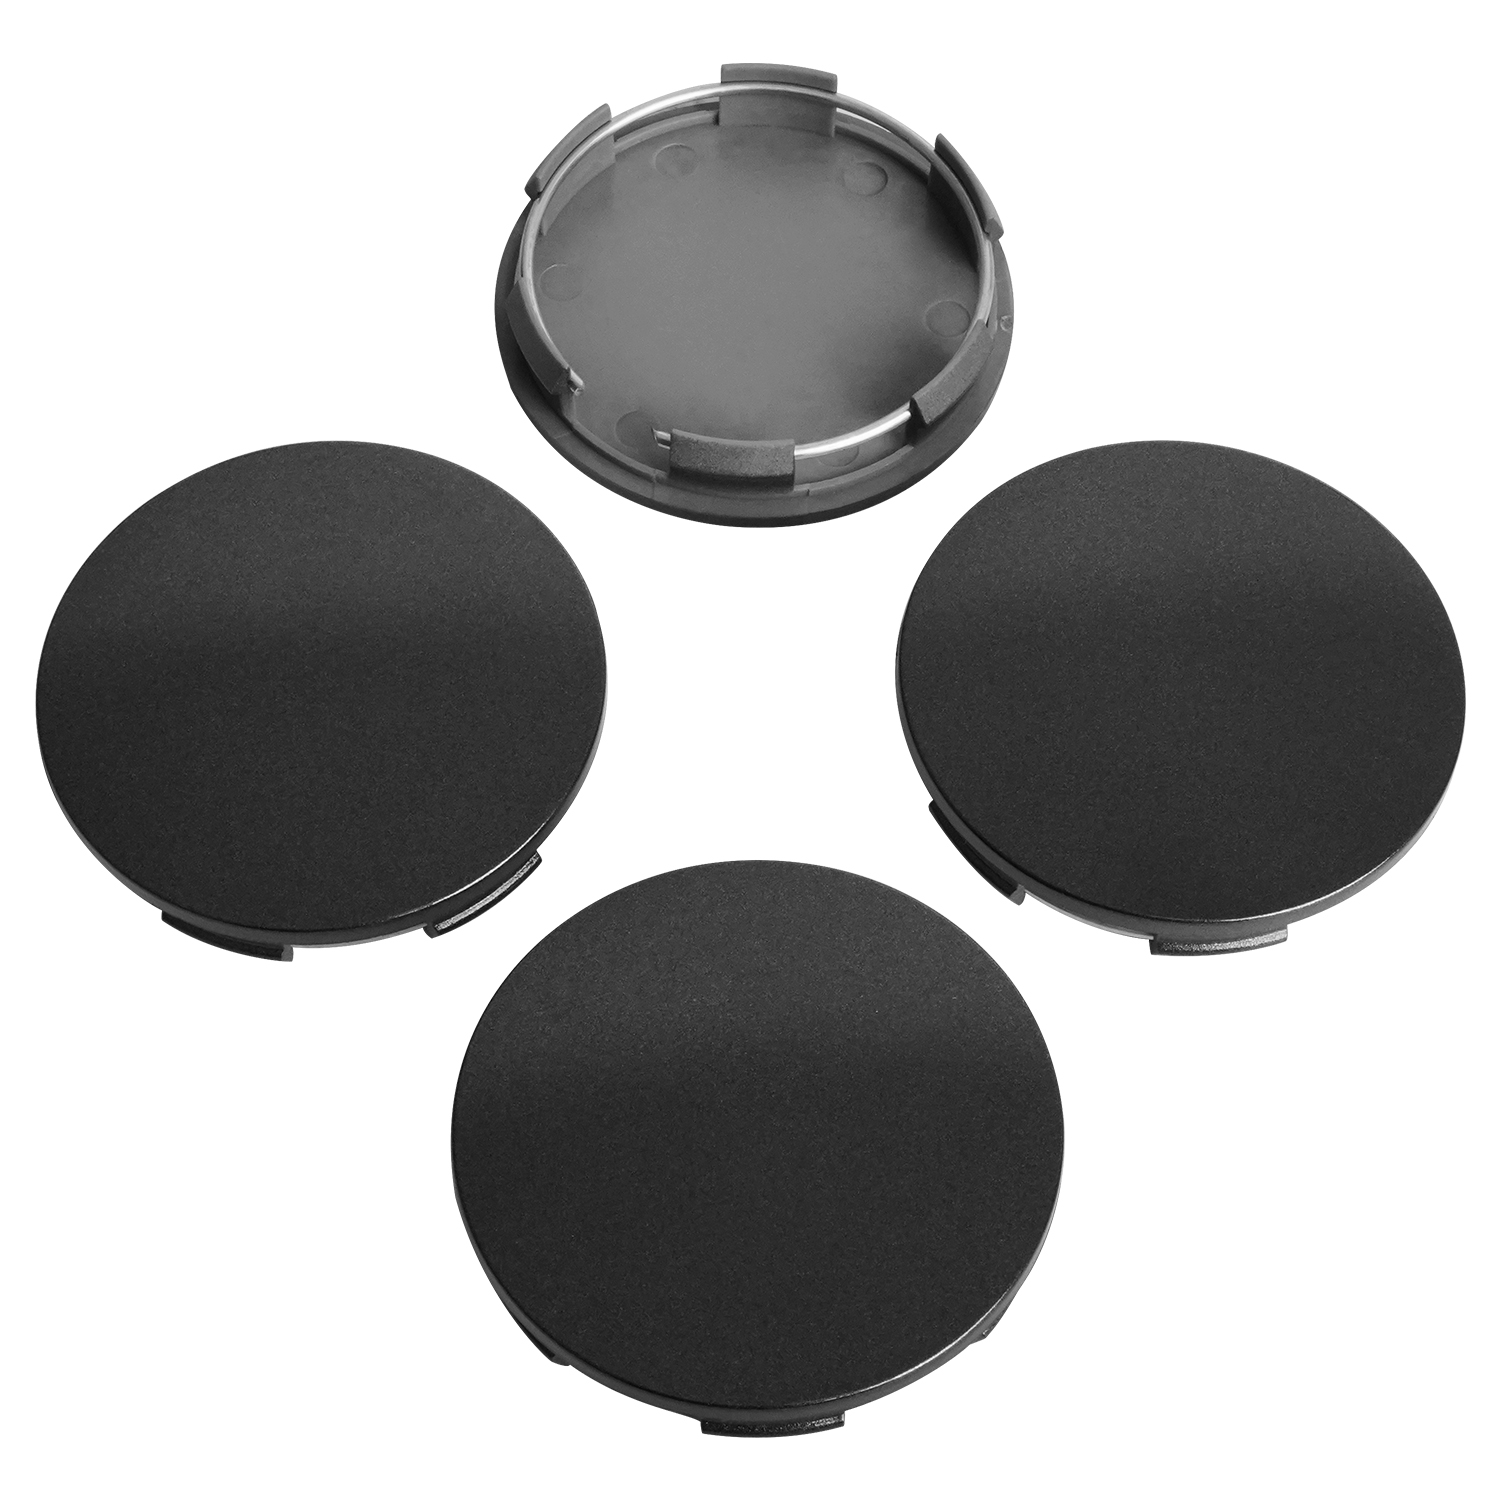 Set of 4 Chrome, Outer 69mm / Inner 64mm KitsPro 69mm 2.7 Wheel Center Caps for 44732-S9A-A00 Accord Civic CRV Pilot and More Center Caps